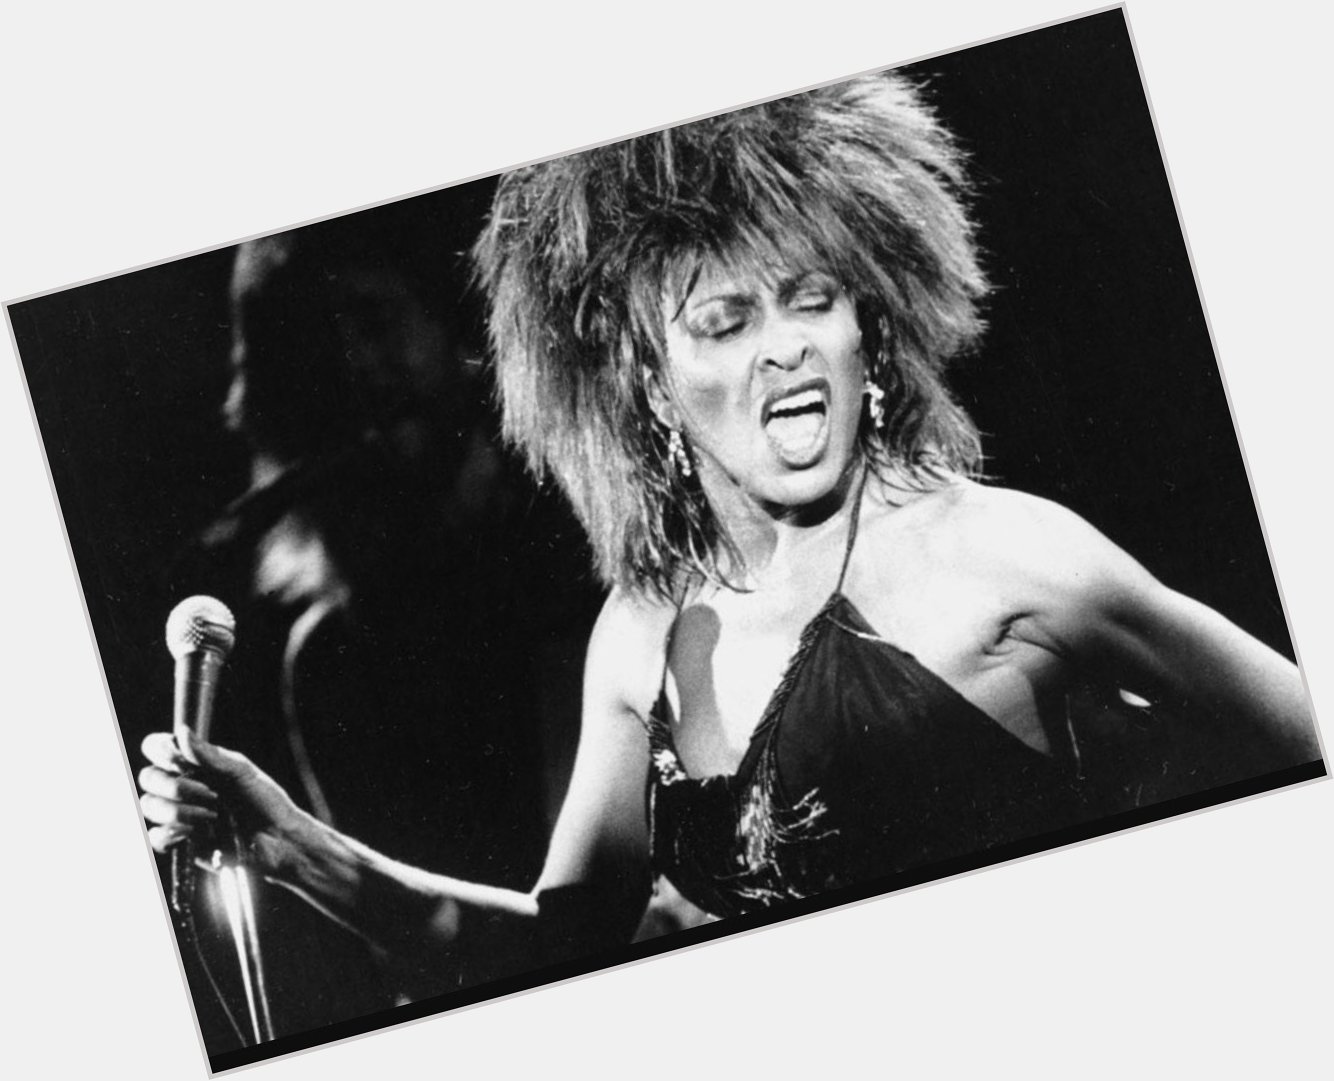 Happy birthday Tina Turner - one of the all time great singers and live performers. Legend.  